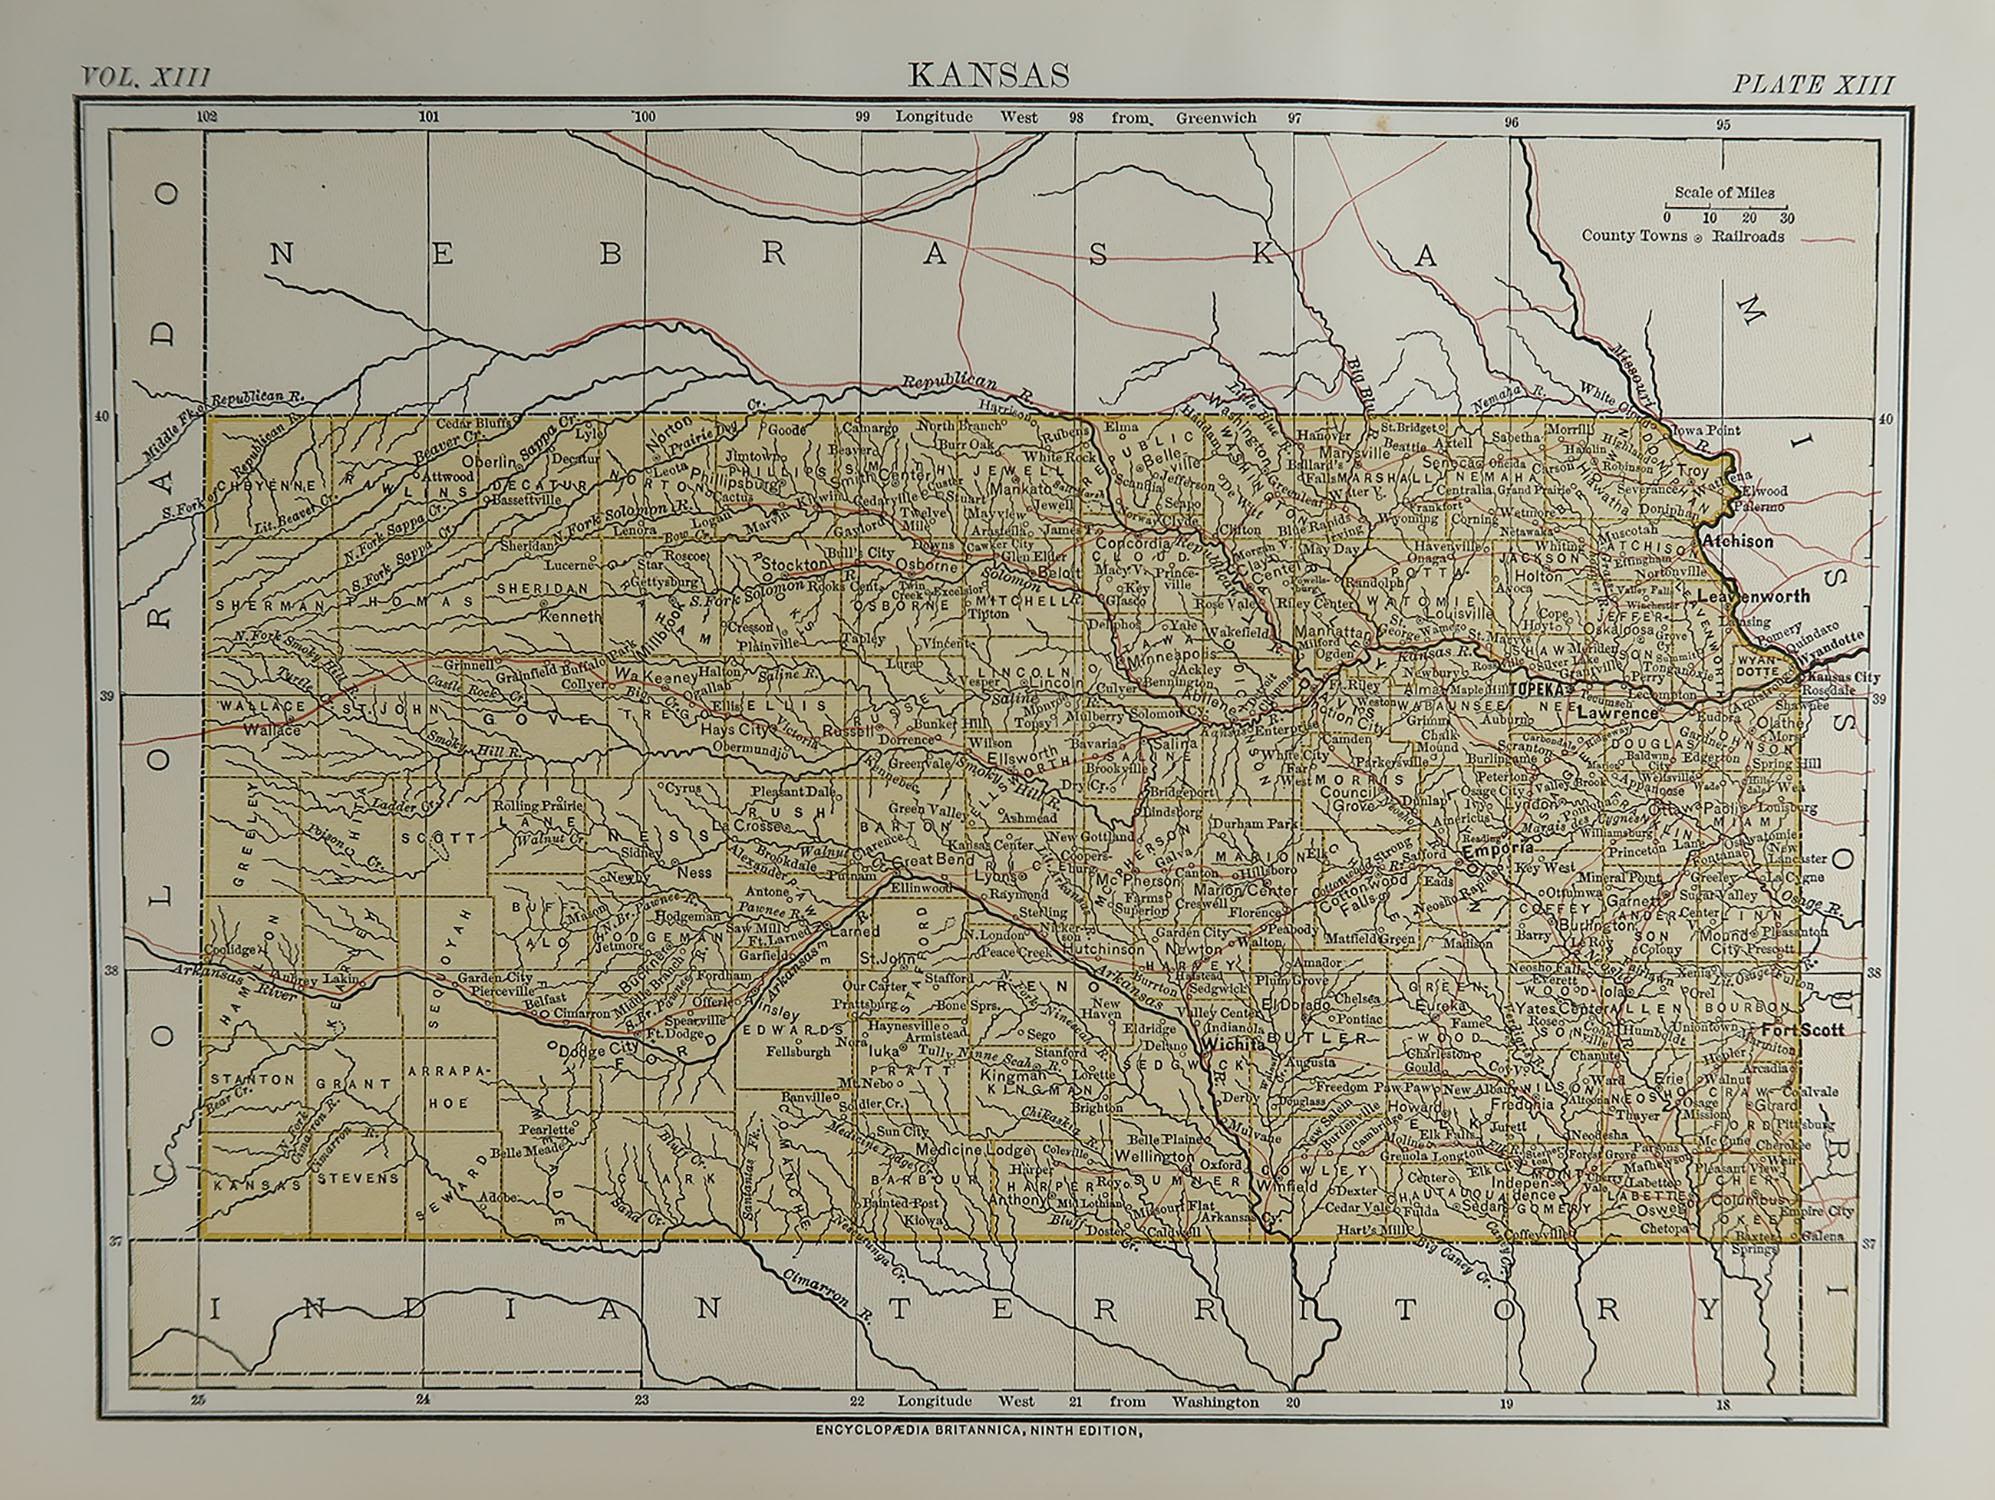 Great map of Kansas

Drawn and engraved by W. & A.K. Johnston

Published By A & C Black, Edinburgh.

Original colour

Unframed.








 